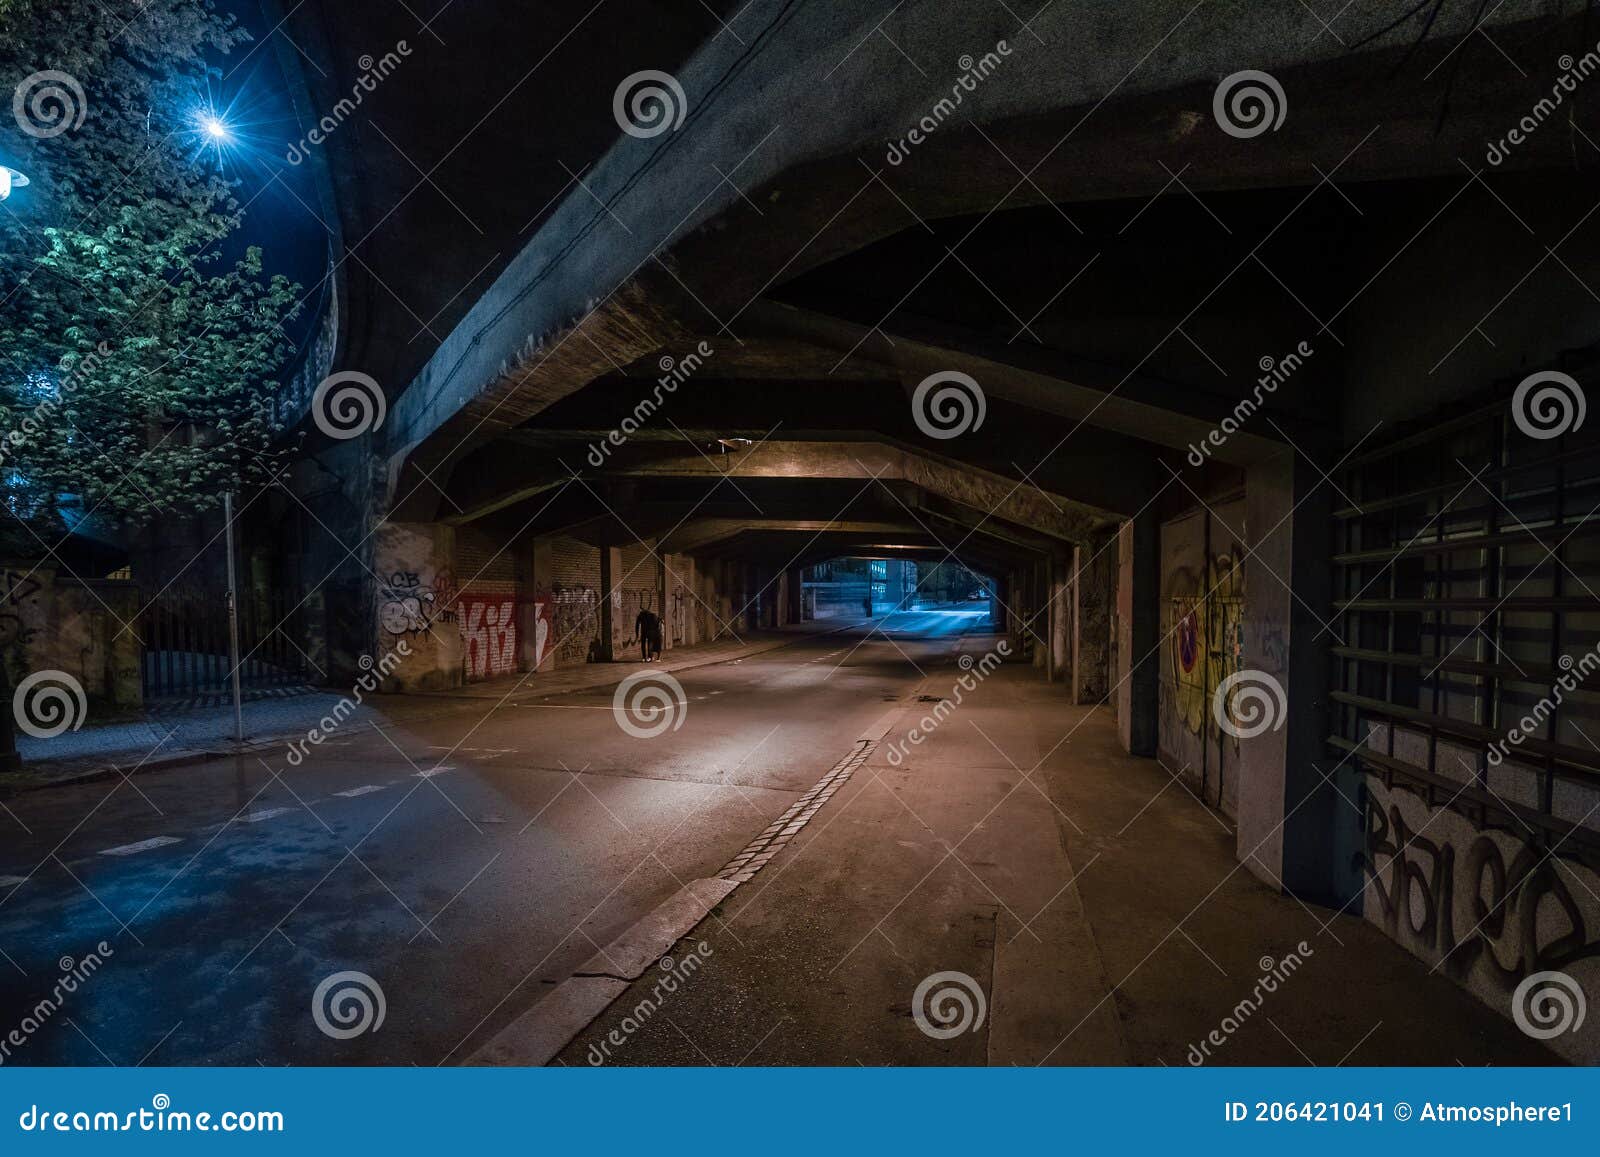 dark empty dirty grunge underground concrete tunel with a road during mystic night with blue street